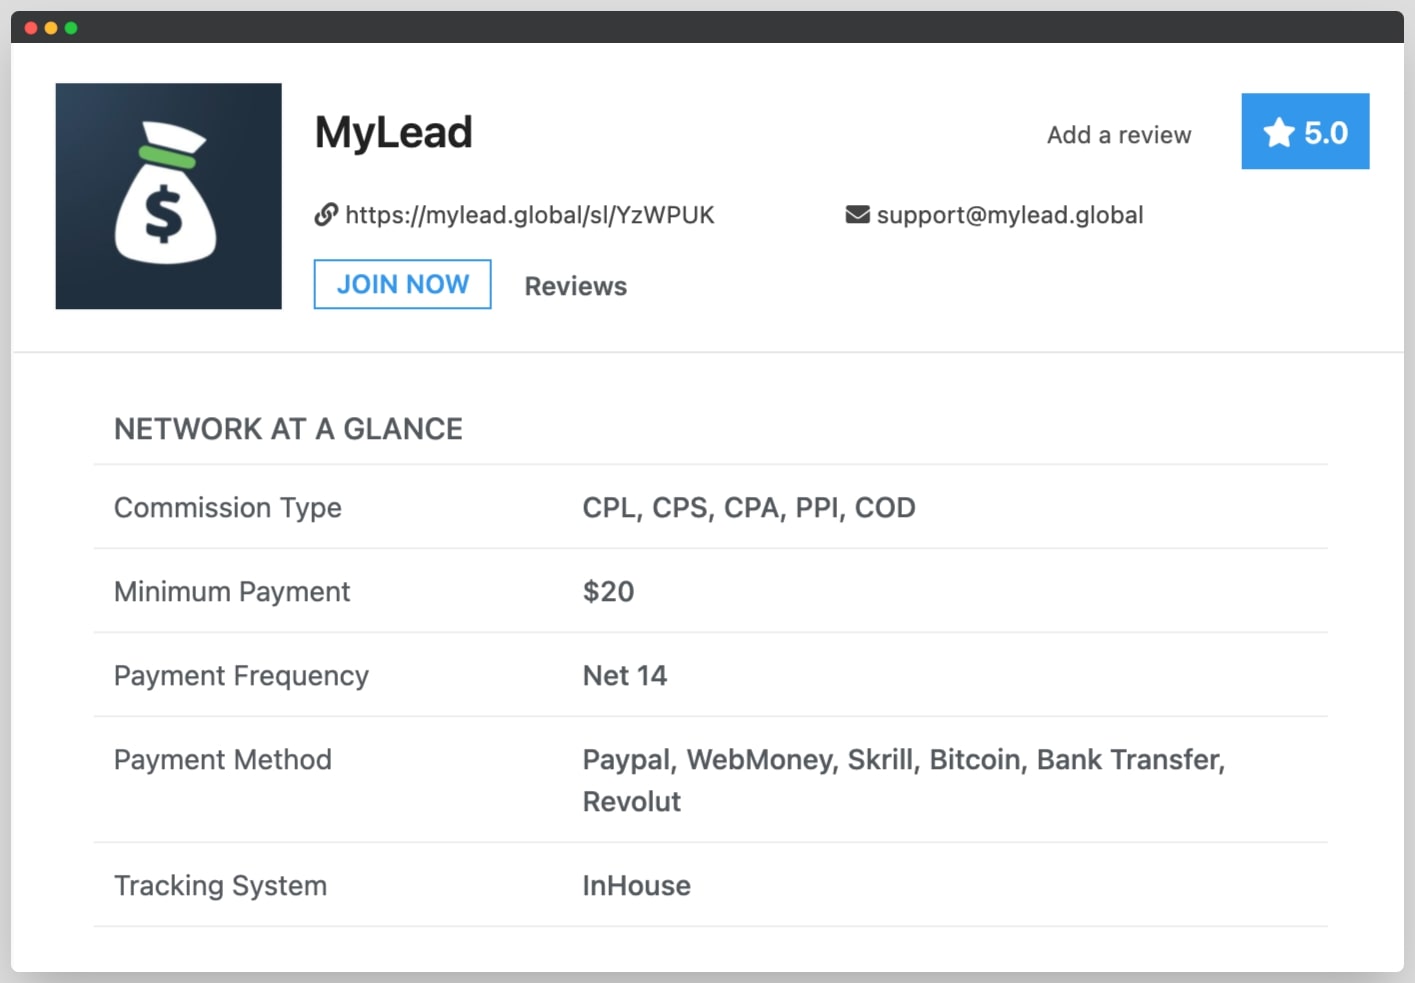 mylead review details